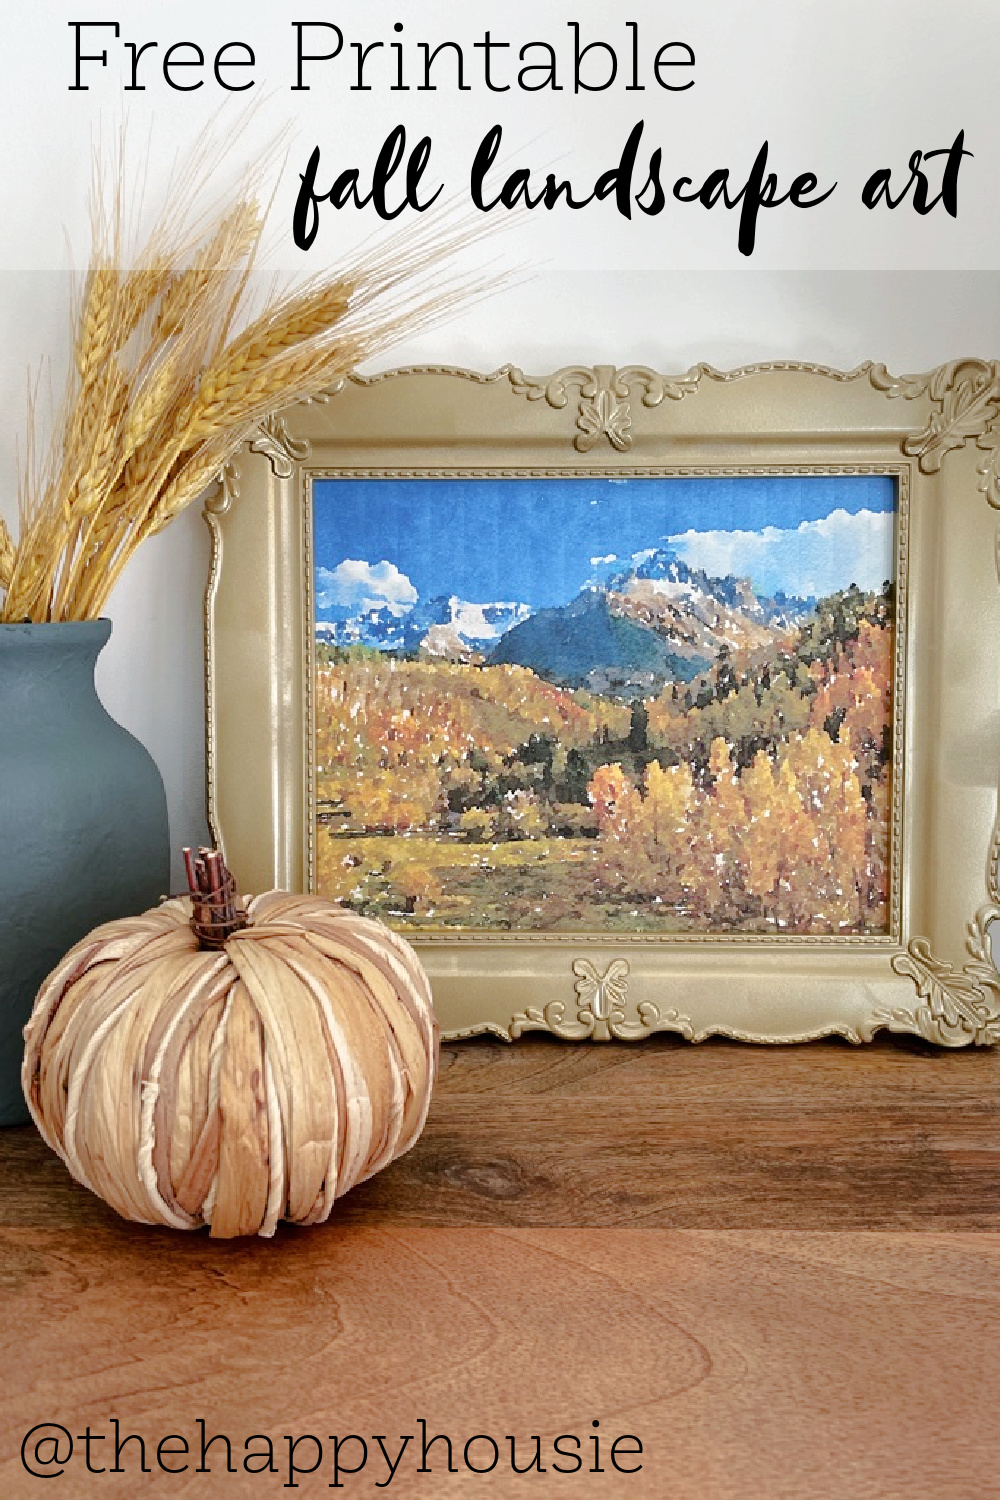 Free Printable Fall Landscape Art graphic.